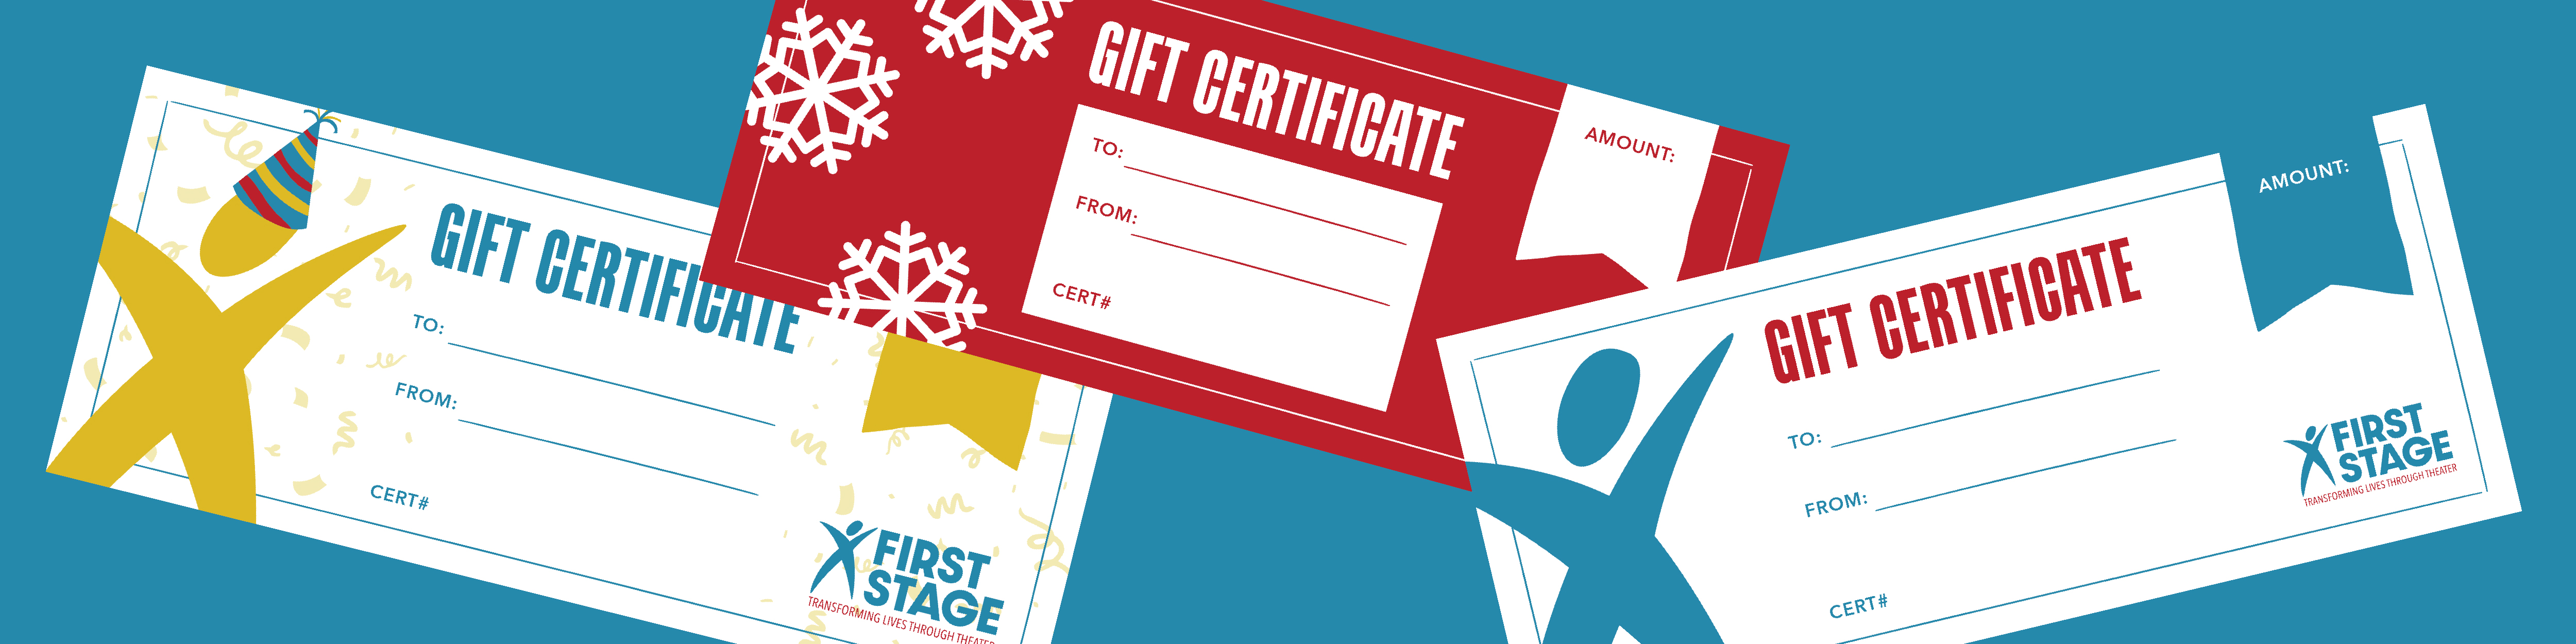 Image of First Stage Gift Certificates